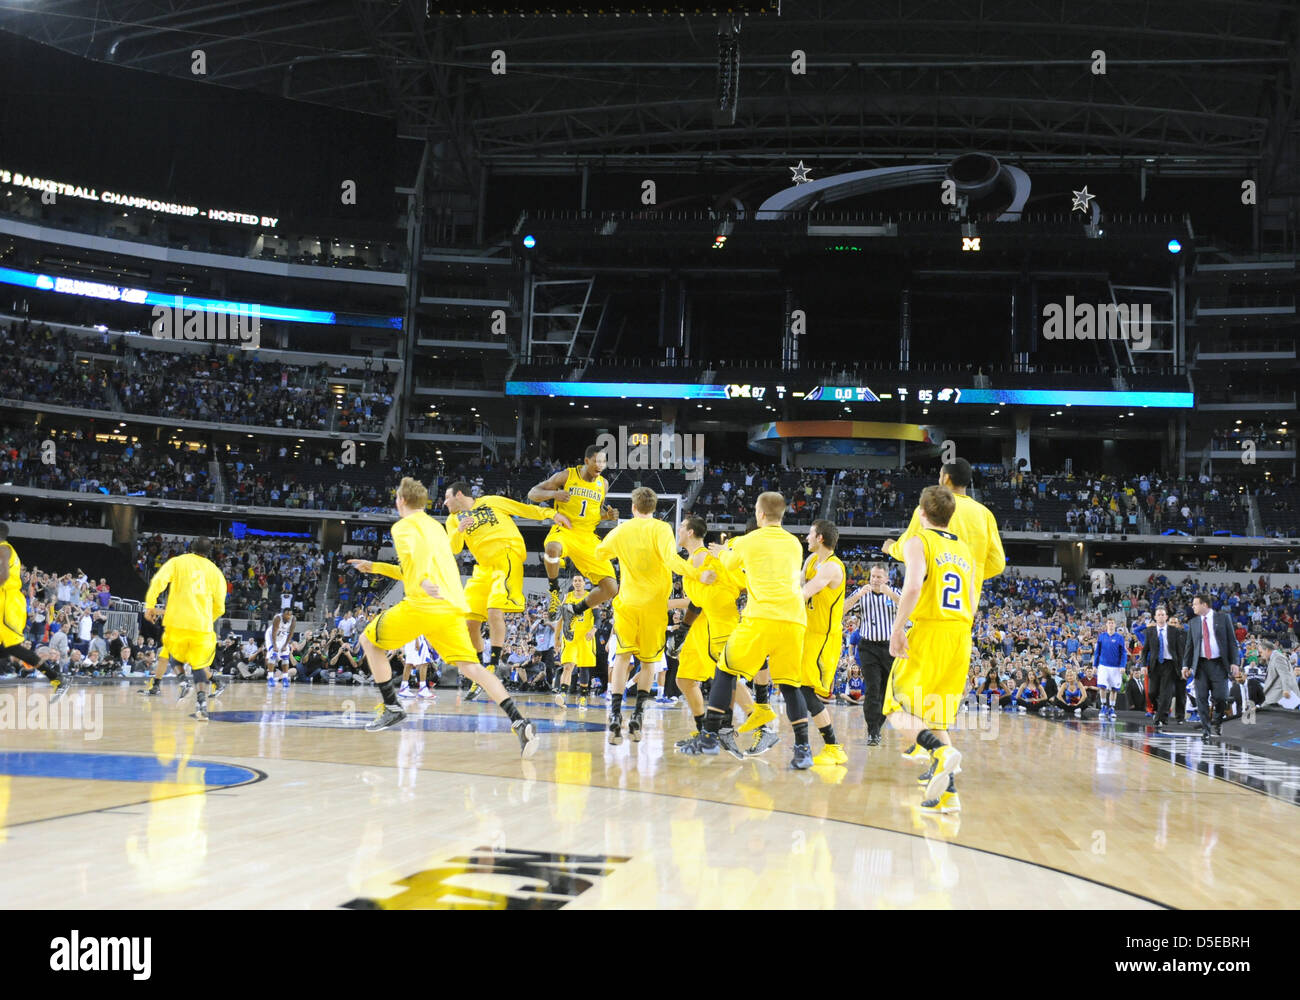 March 29, 2013: The Michigan players celebrate on the court at the end of regulation time after the NCAA Tournament South region game between the University of Michigan Wolverines and the University of Kansas Jayhawks at Cowboys Stadium in Arlington, TX Michigan defeated Kansas 87-85 Stock Photo